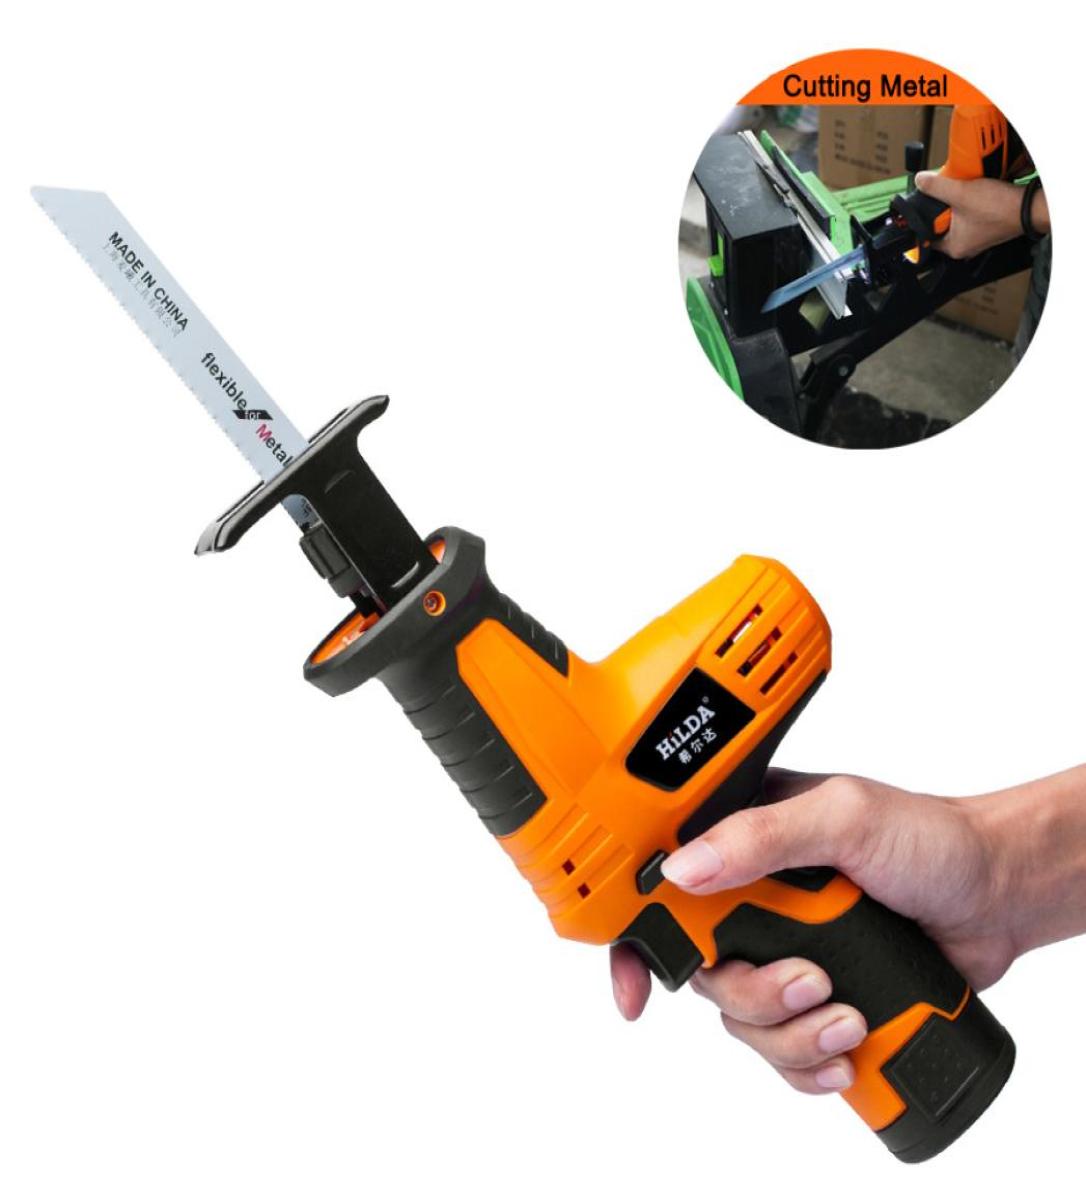 DHL 12V Cordless Reciprocating Saw Adjustable Speed Electric Saw Portable Electric Saw for Wood Metal Cutting4825450